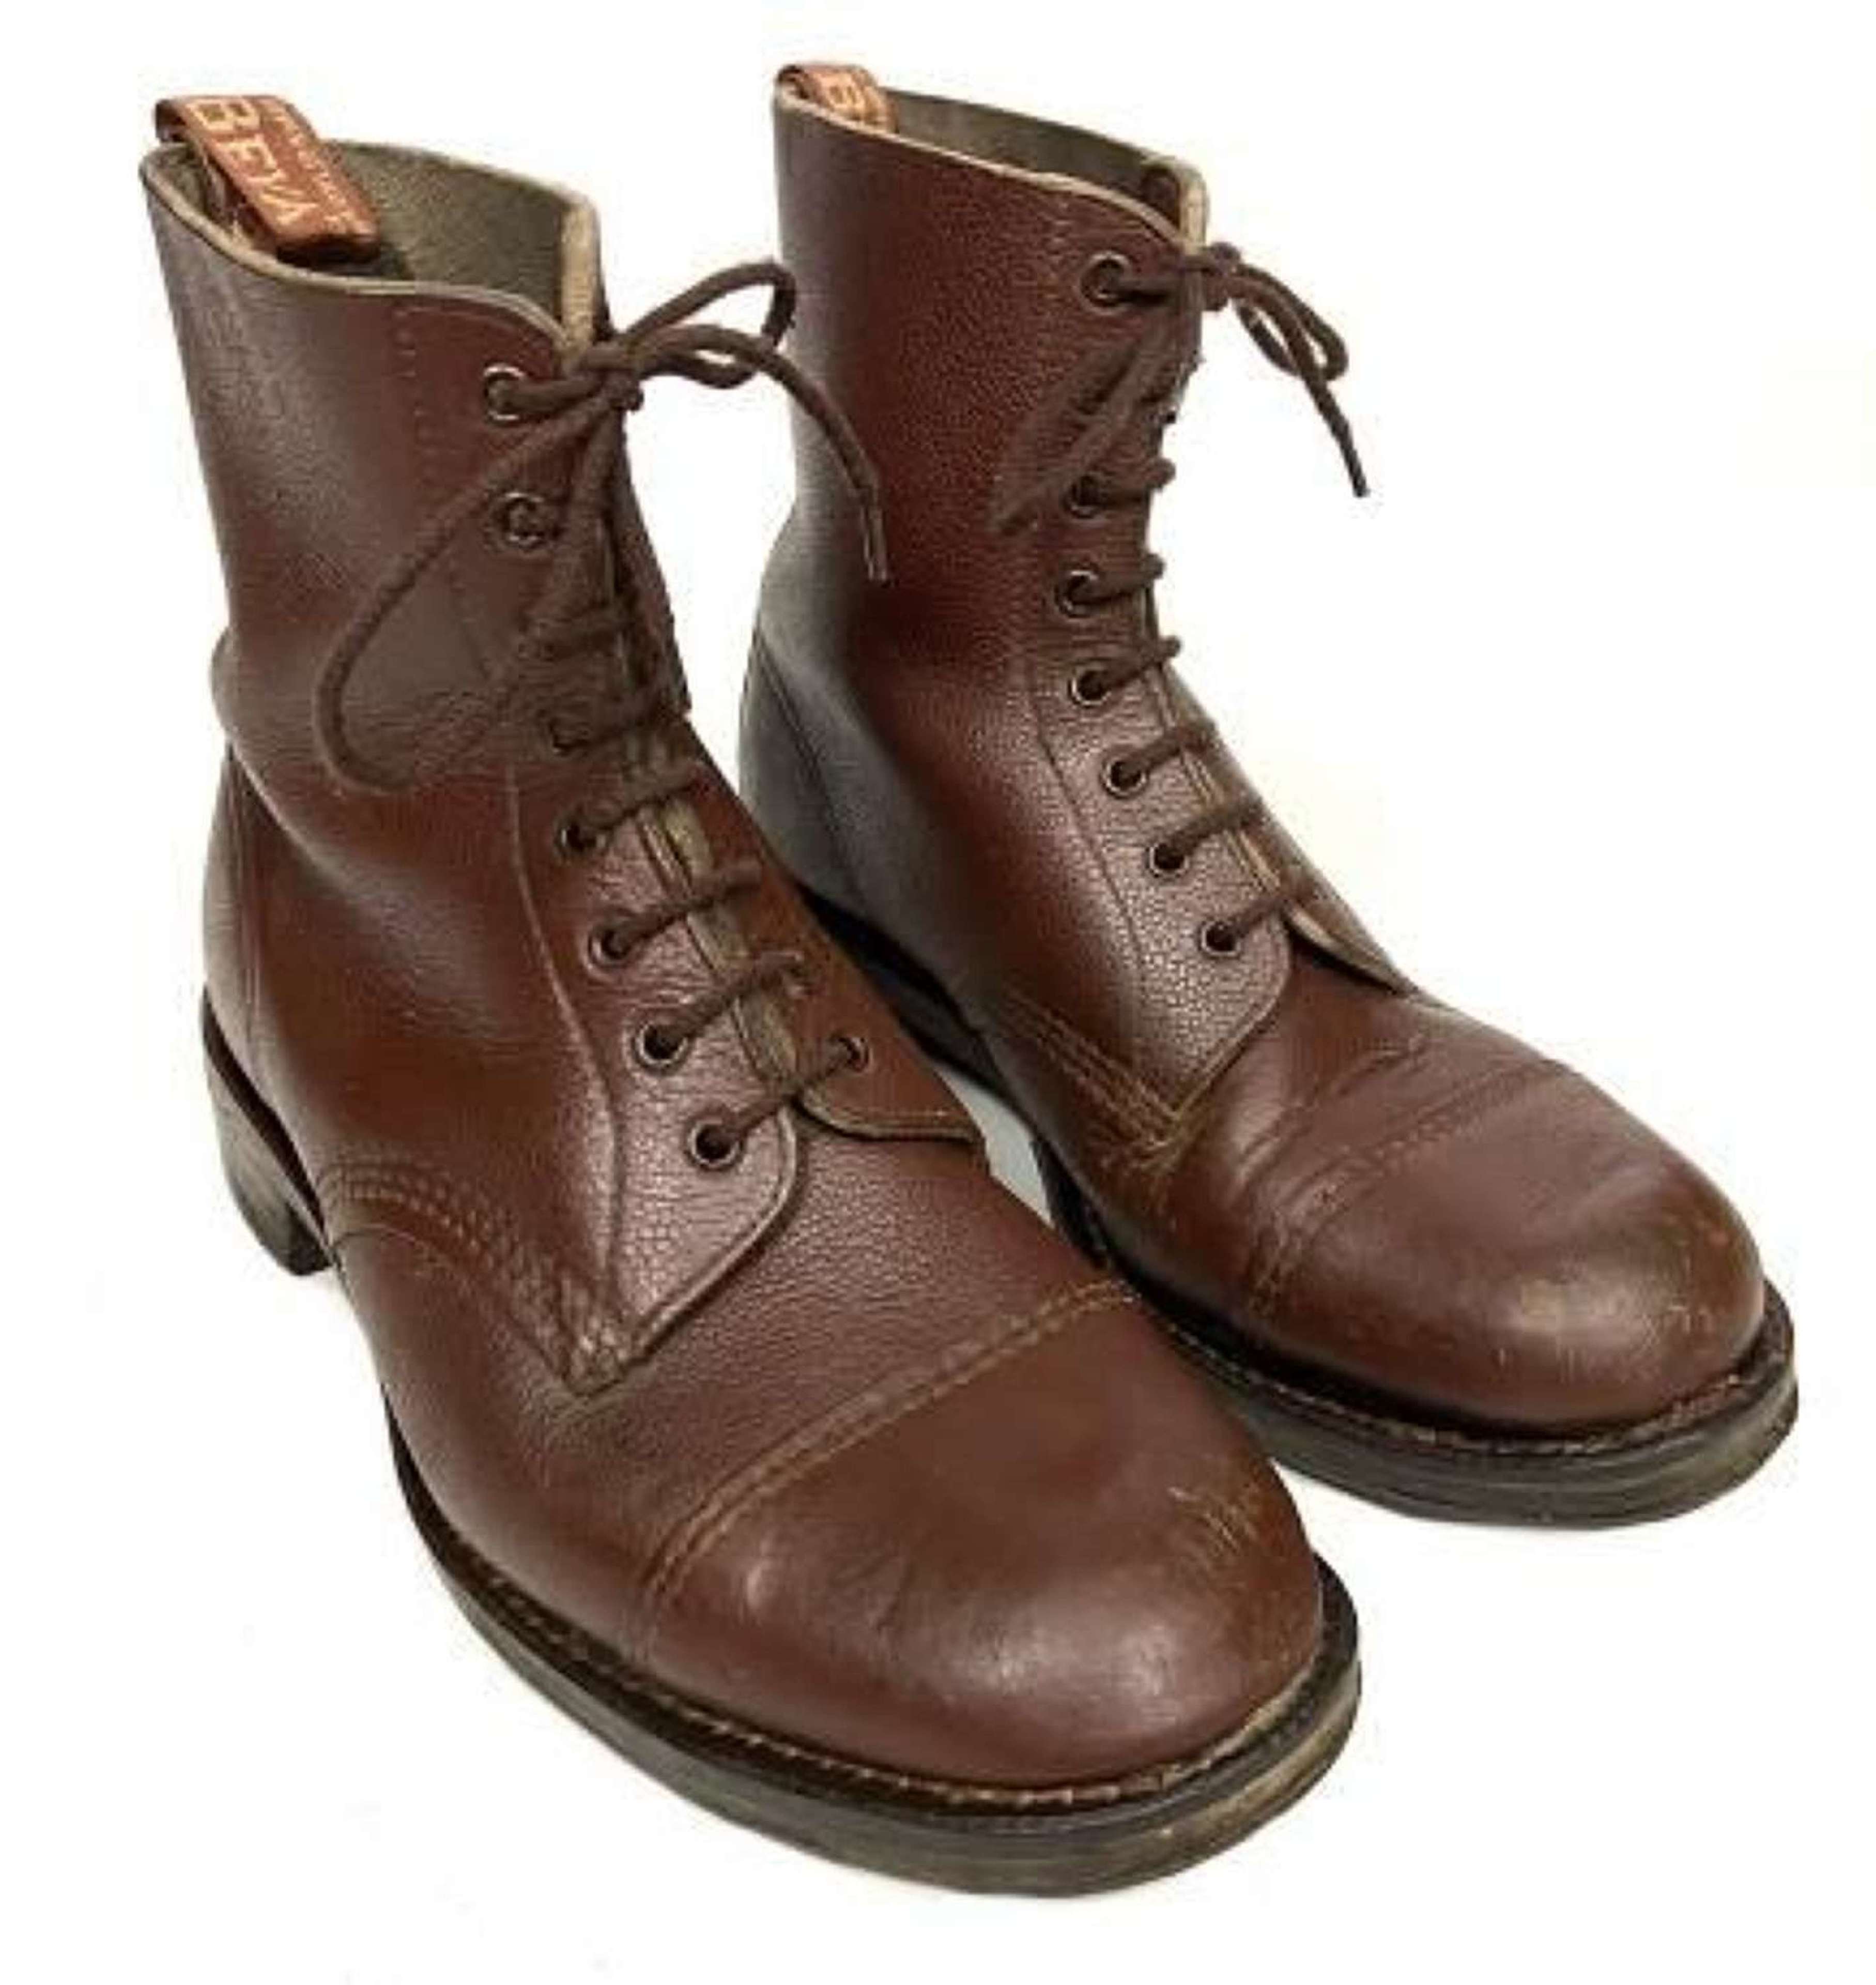 Original 1950s Men's Brown Leather Ankle Boots by 'BEVA' - Size 10 in ...